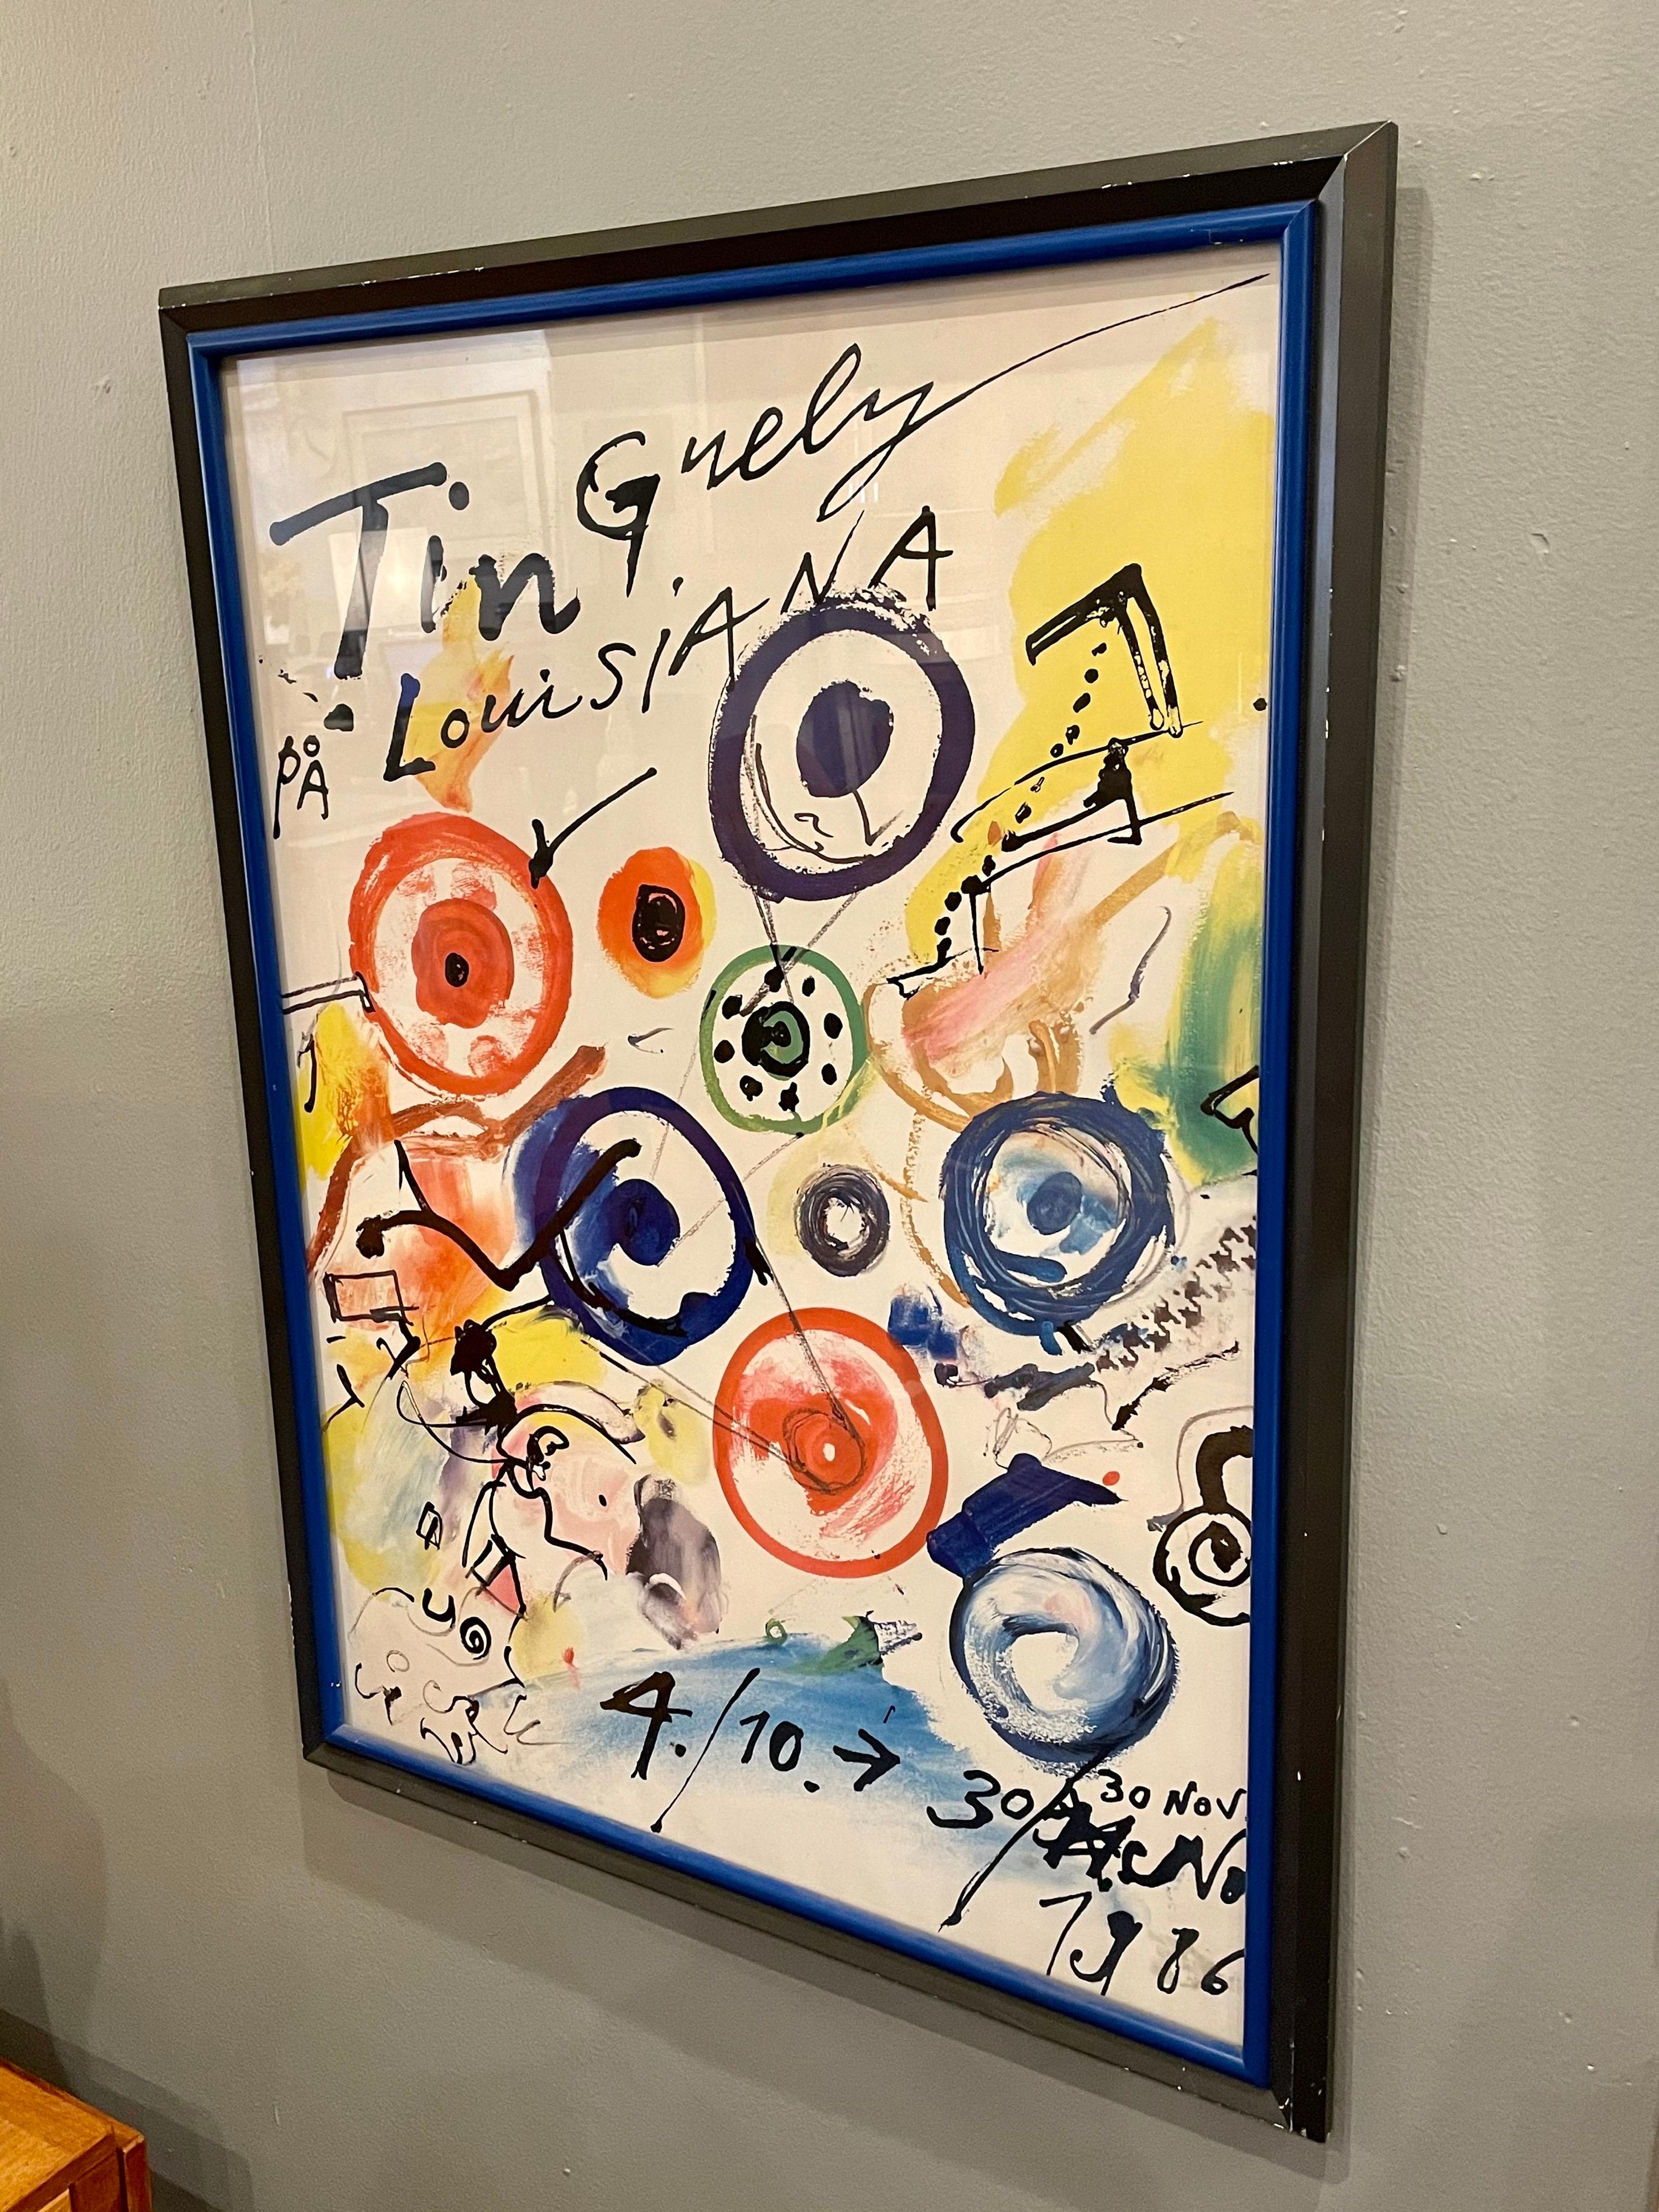 Listed artist original framed poster by Jean Tinguely titled Louisiana from 1986, the colors are nice and bright the frame shows some scuffs and marks, due to age and ware has a certificate in the back as shown.